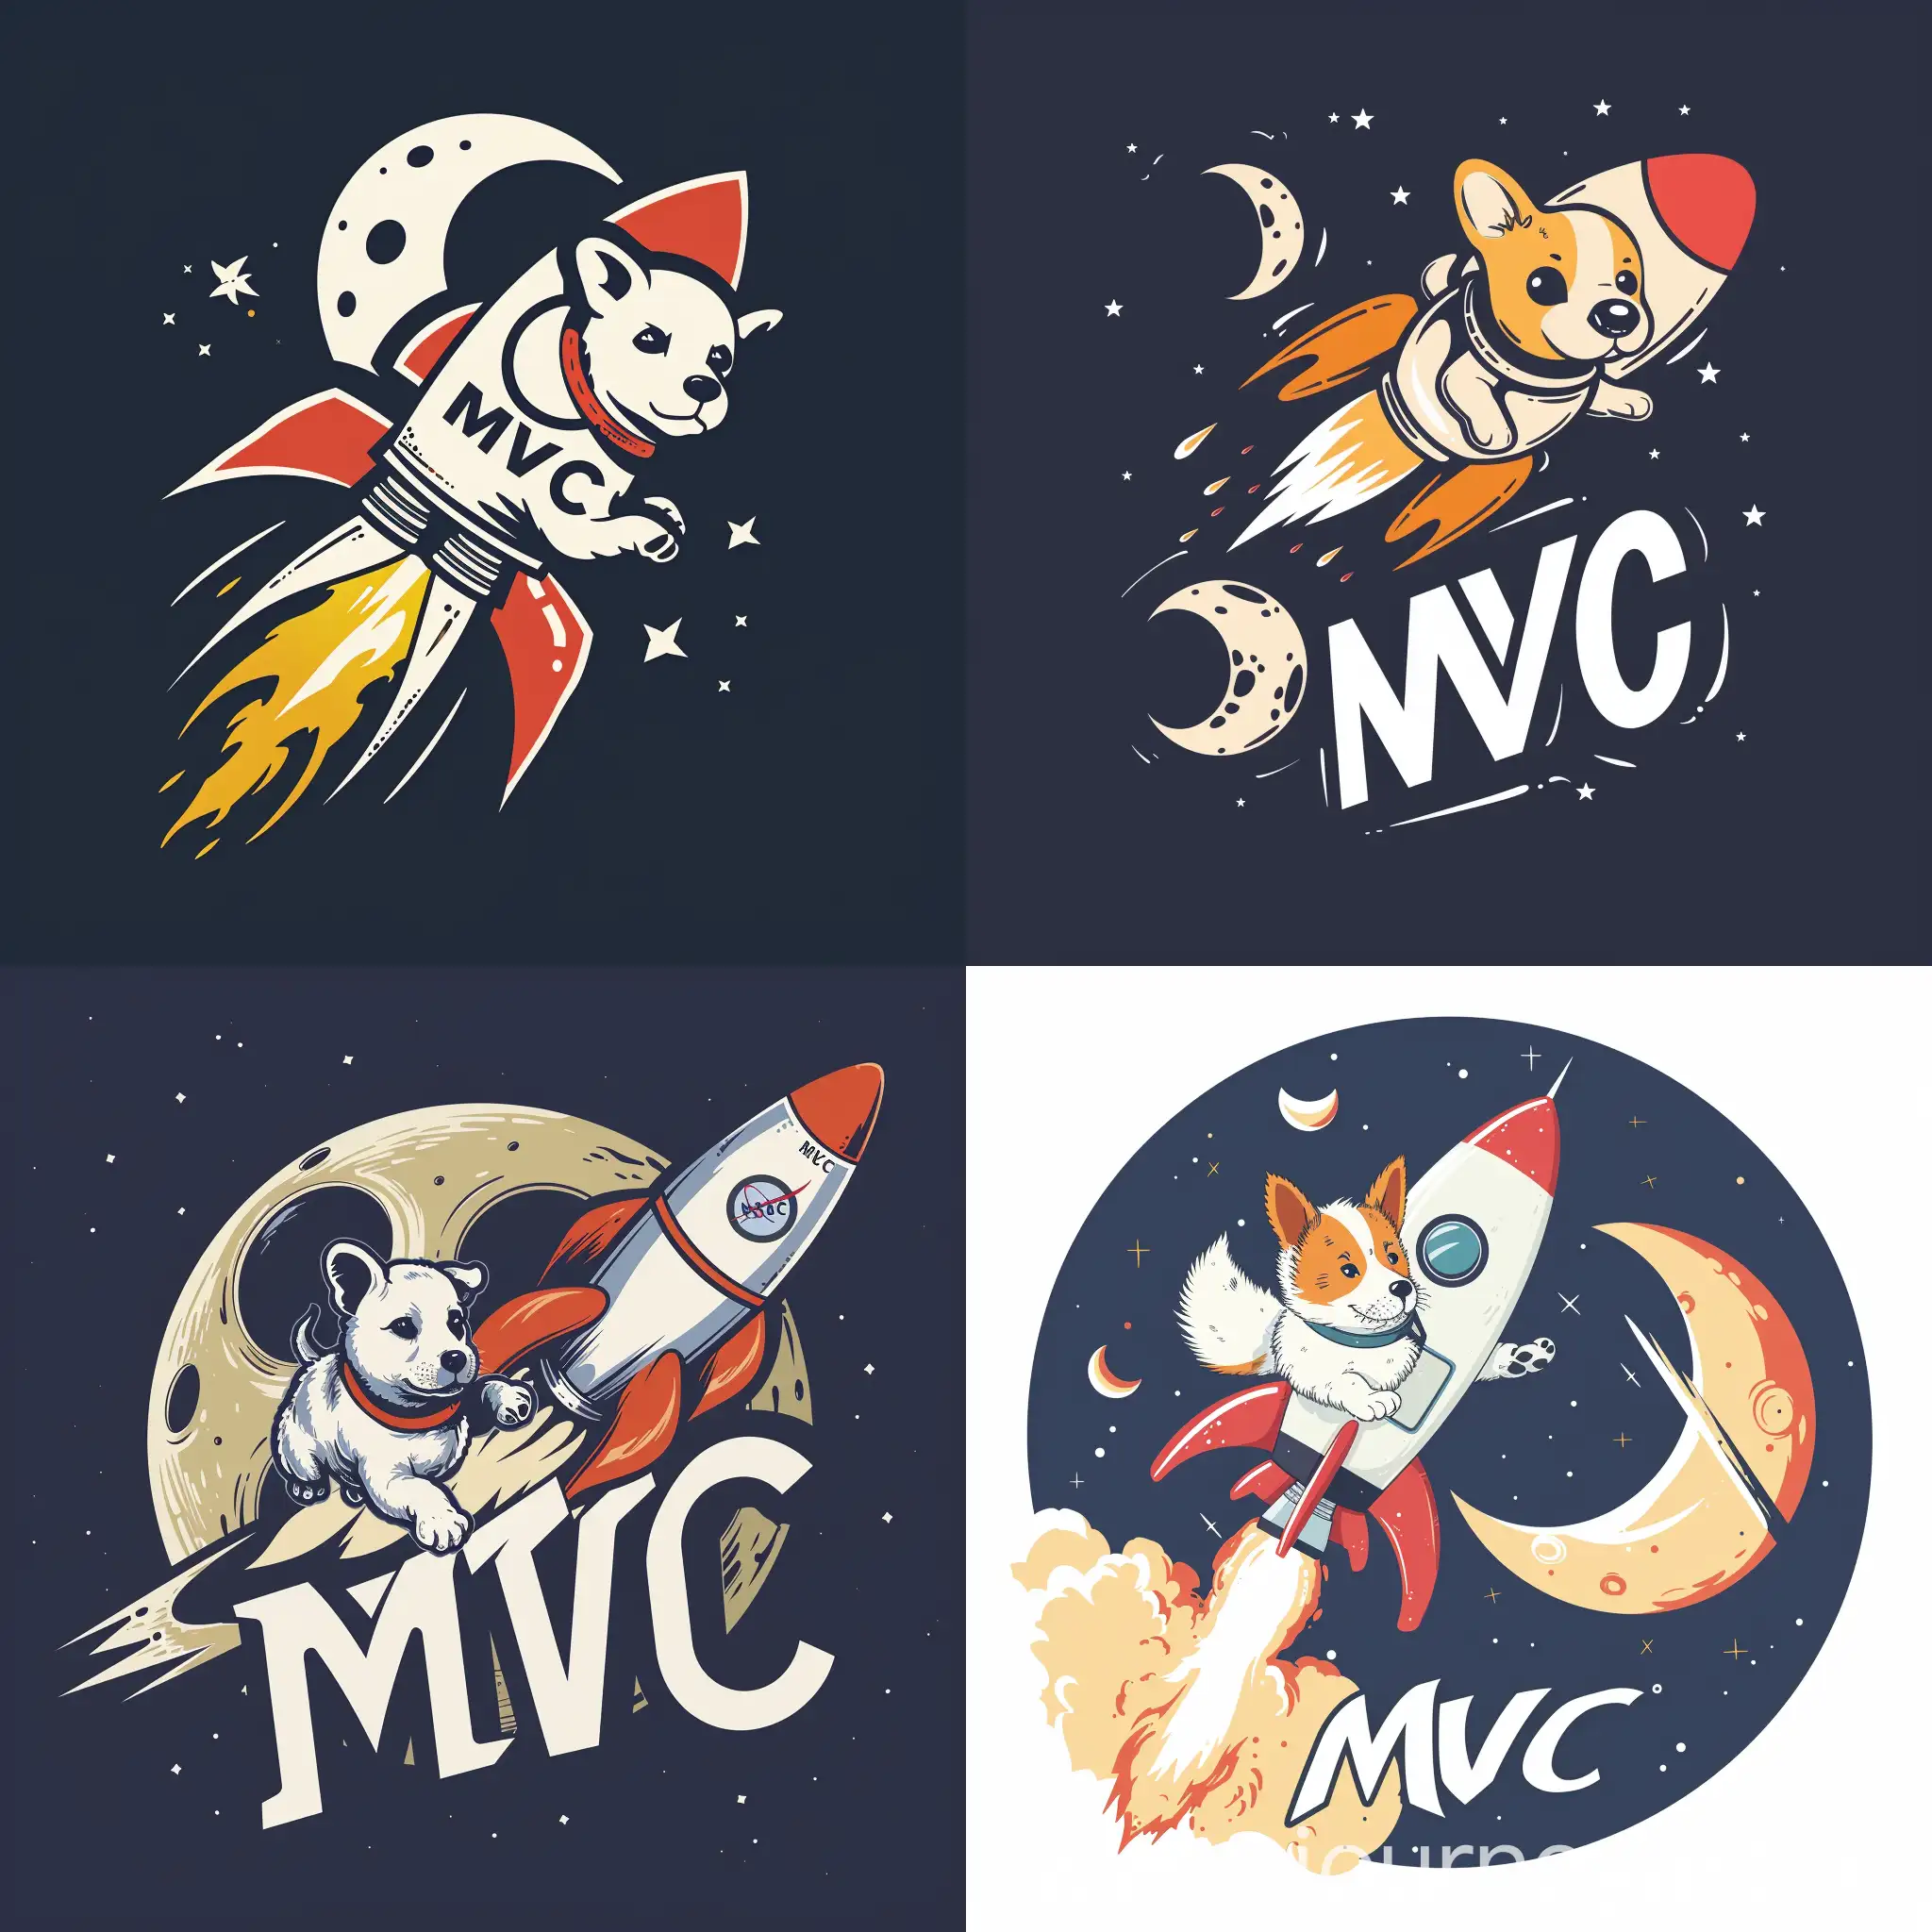 Cute dog going to space on a rocket. passing the moon. Logo: "MVC"